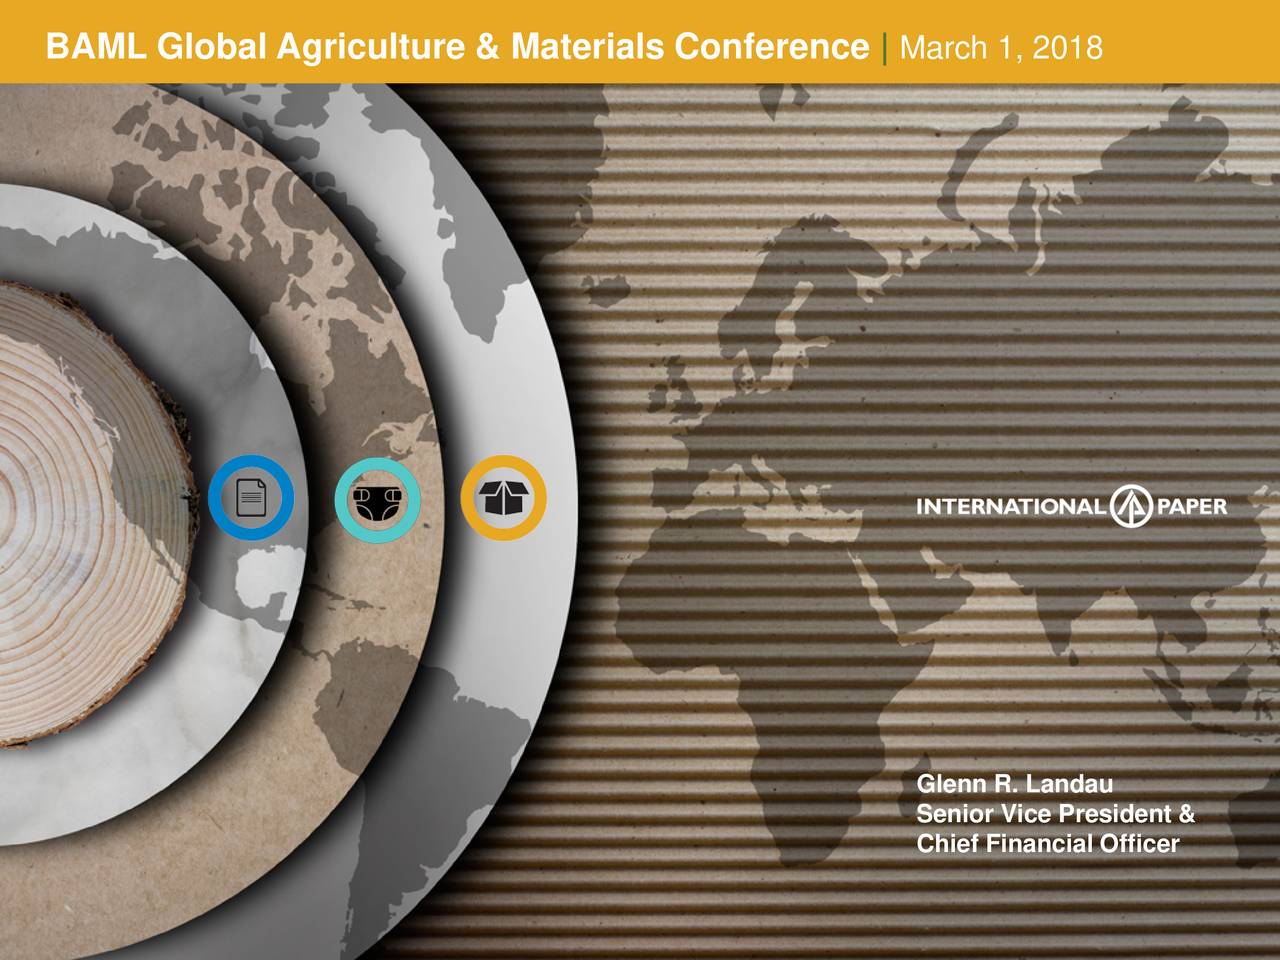 BAML Global Agriculture & Materials Conference|                March 1, 2018